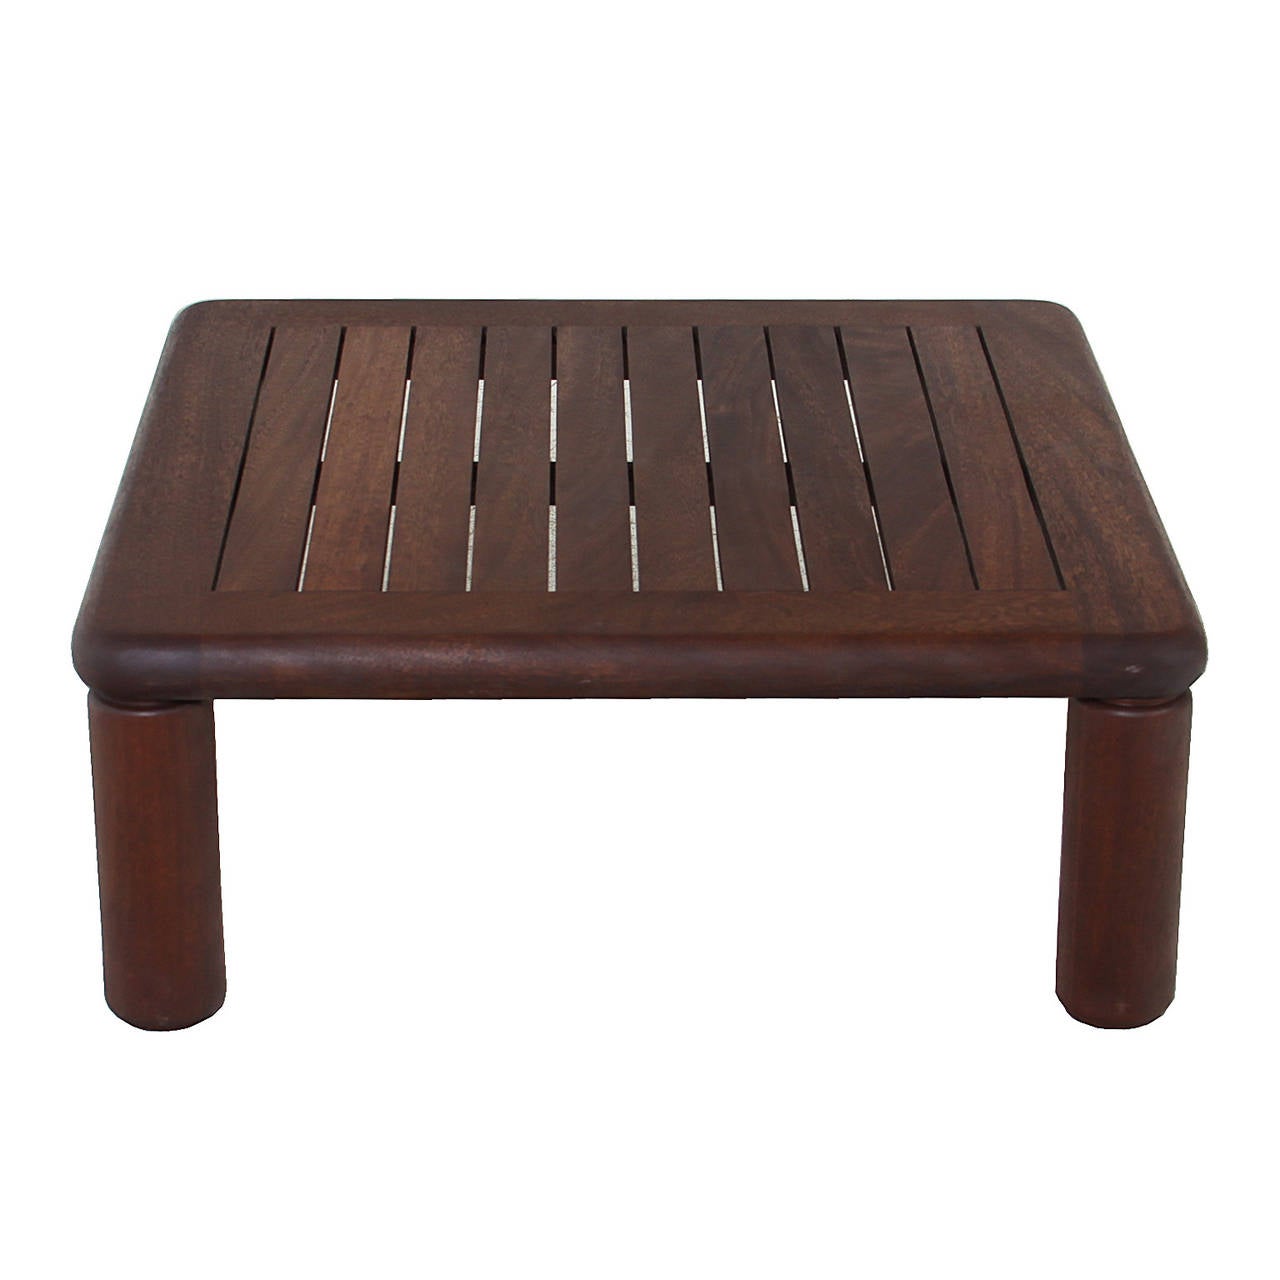 Slatted Solid Honduran Mahogany coffee table by Sherrill Broudy In Good Condition For Sale In Hollywood, CA